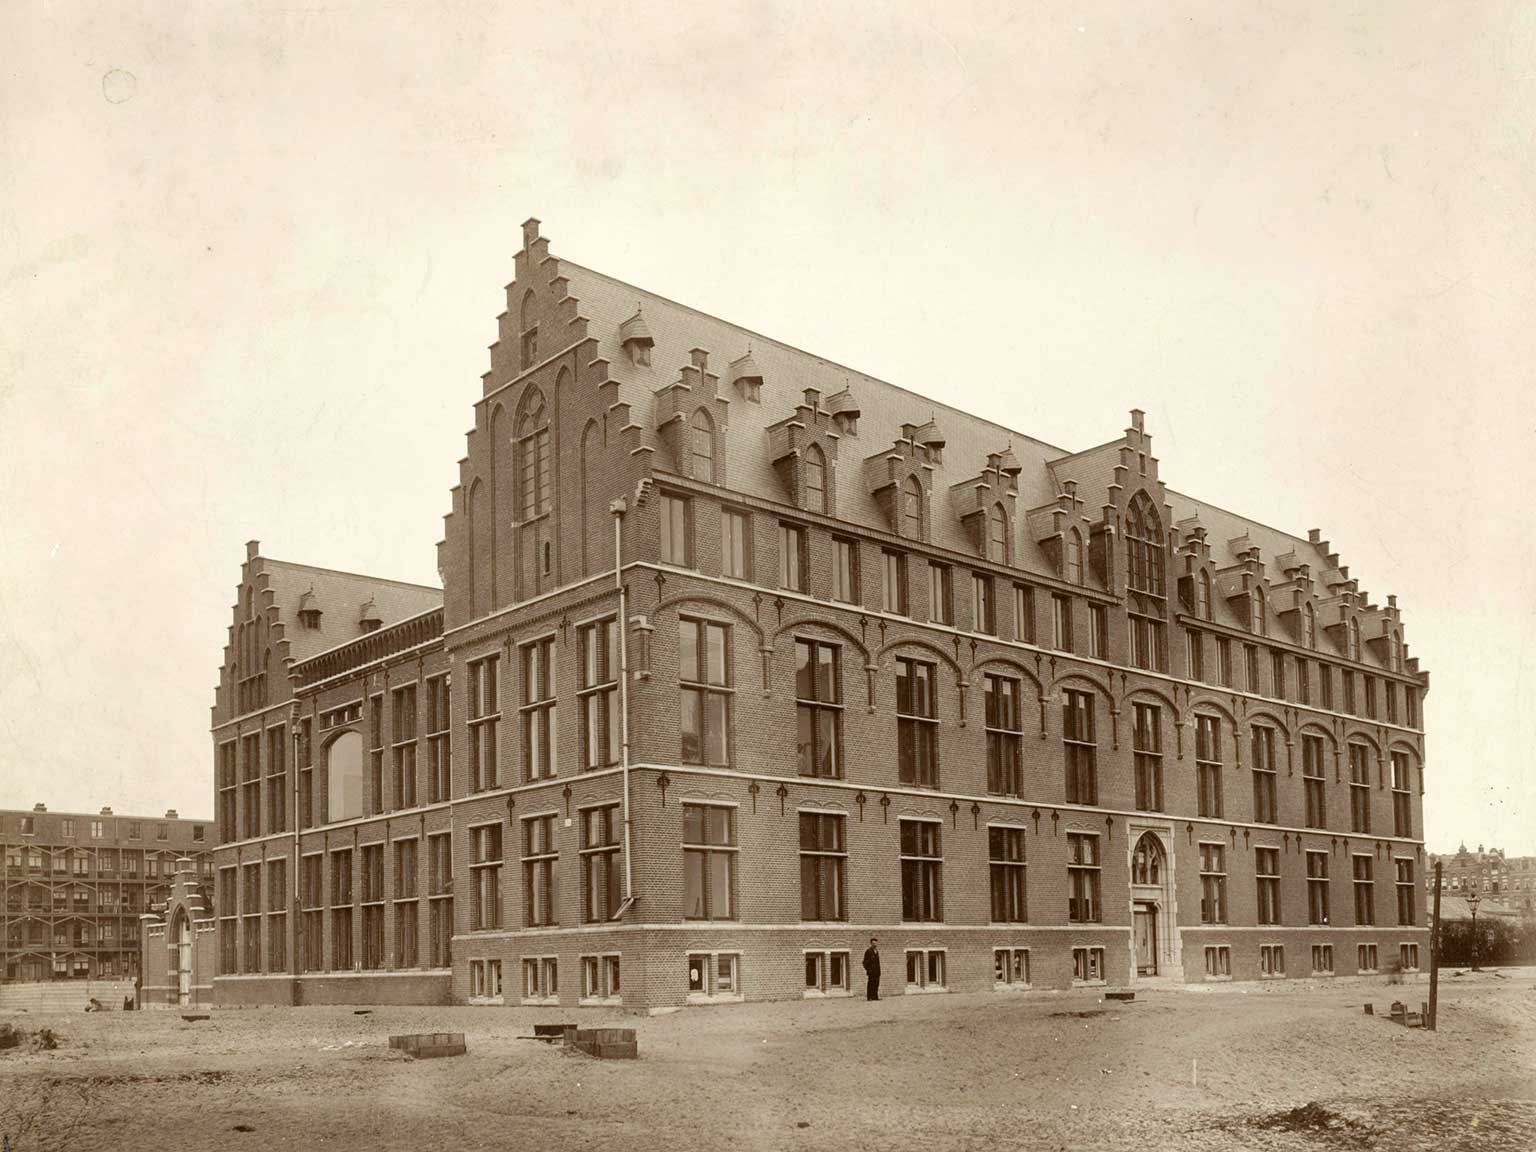 National School for Midwives, Camperstraat 17, Amsterdam, around 1900